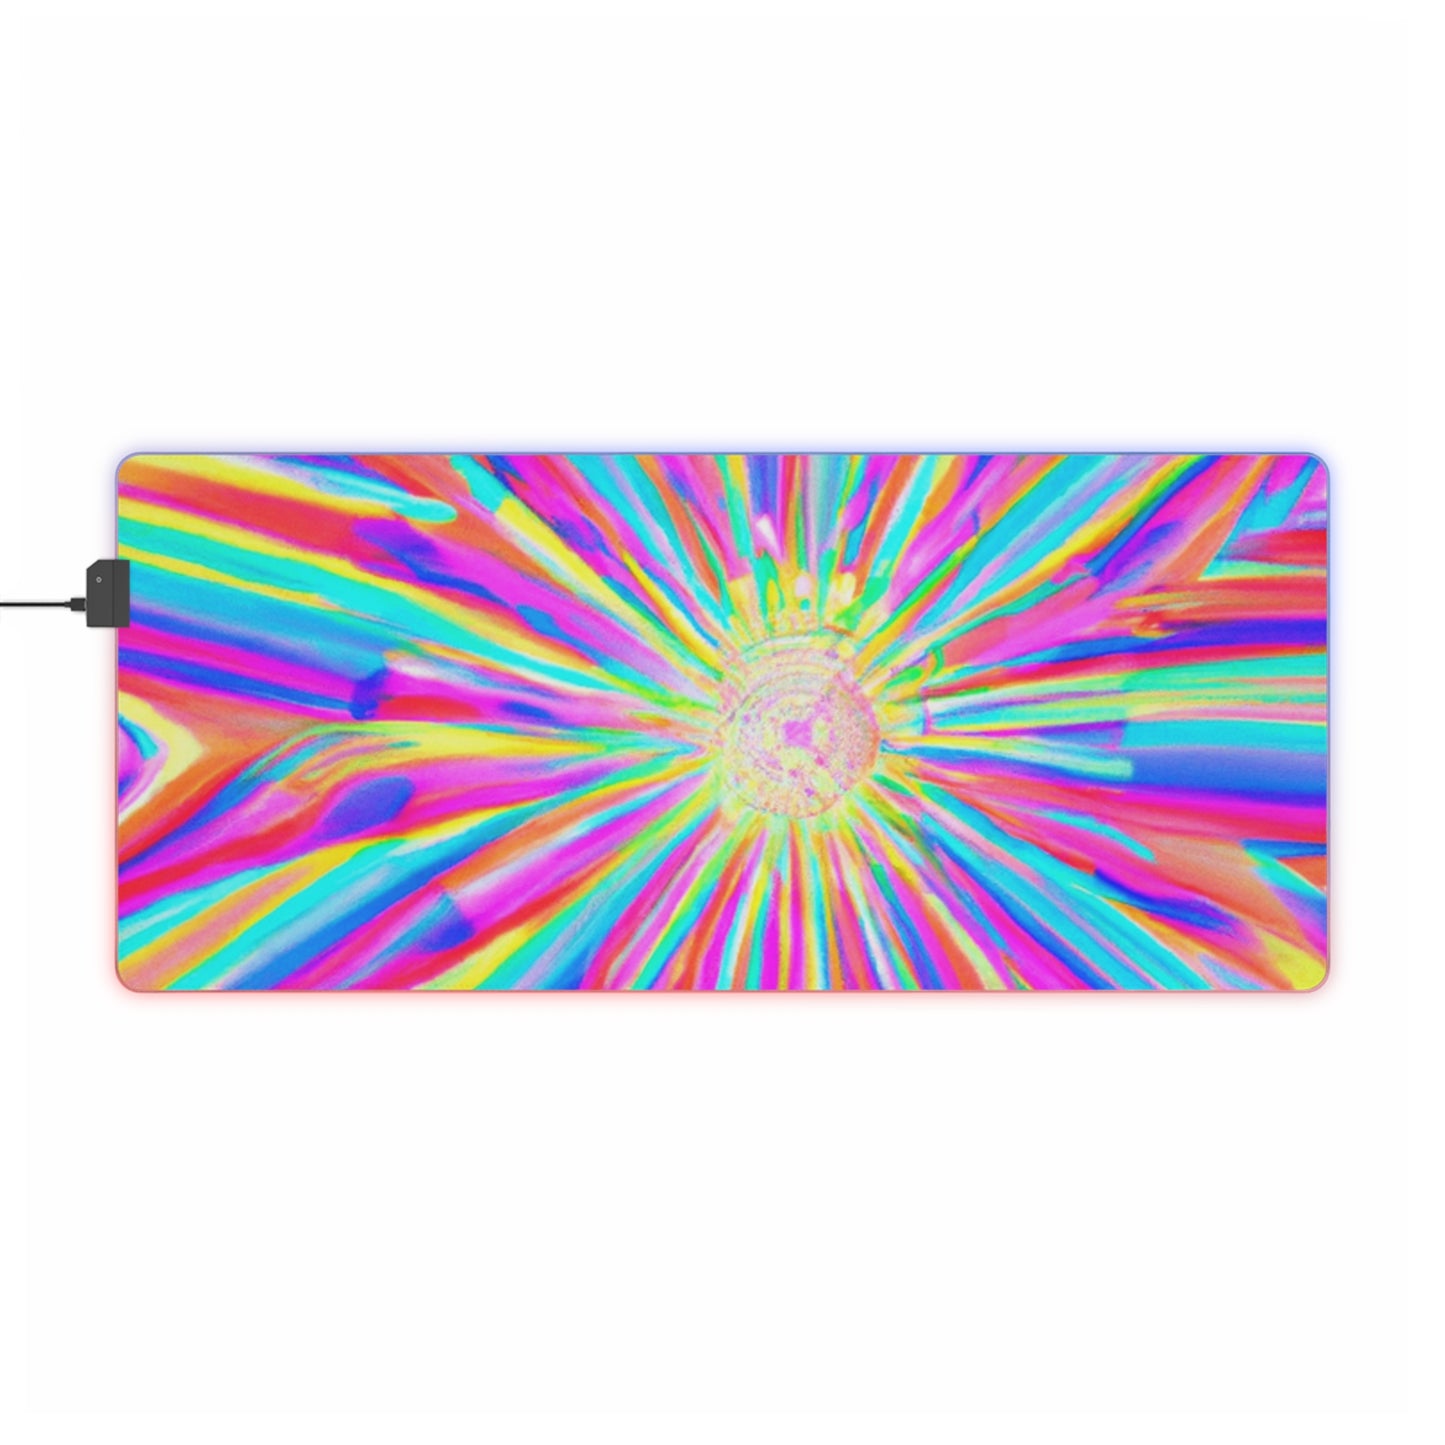 Pinky the Pinball Wizard - Psychedelic Trippy LED Light Up Gaming Mouse Pad